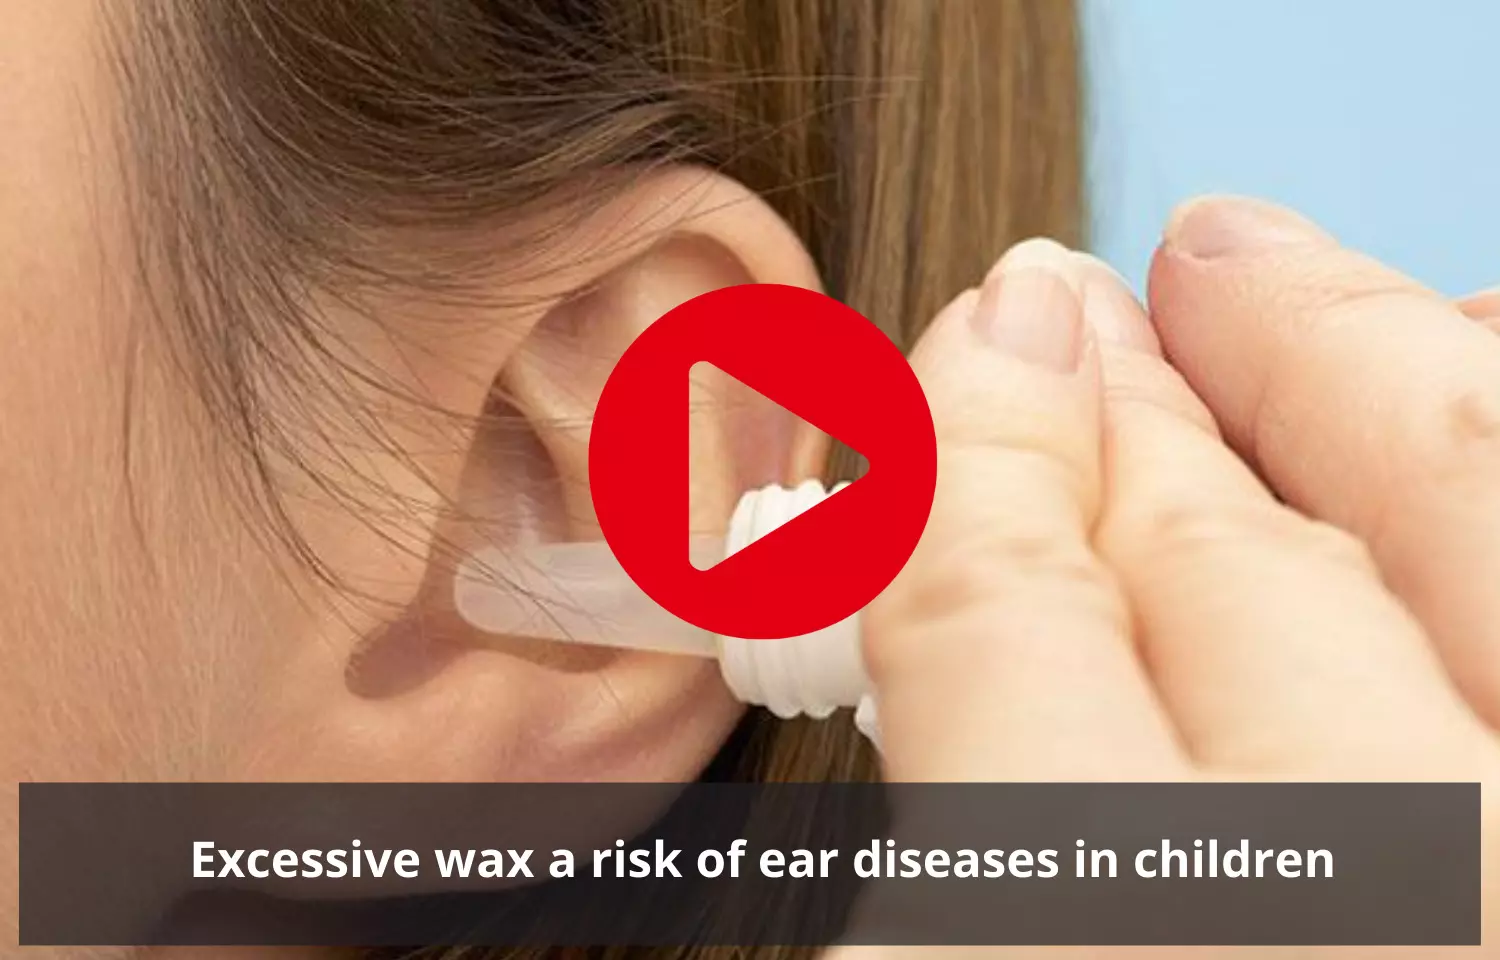 Excessive wax a risk factor of ear diseases in children